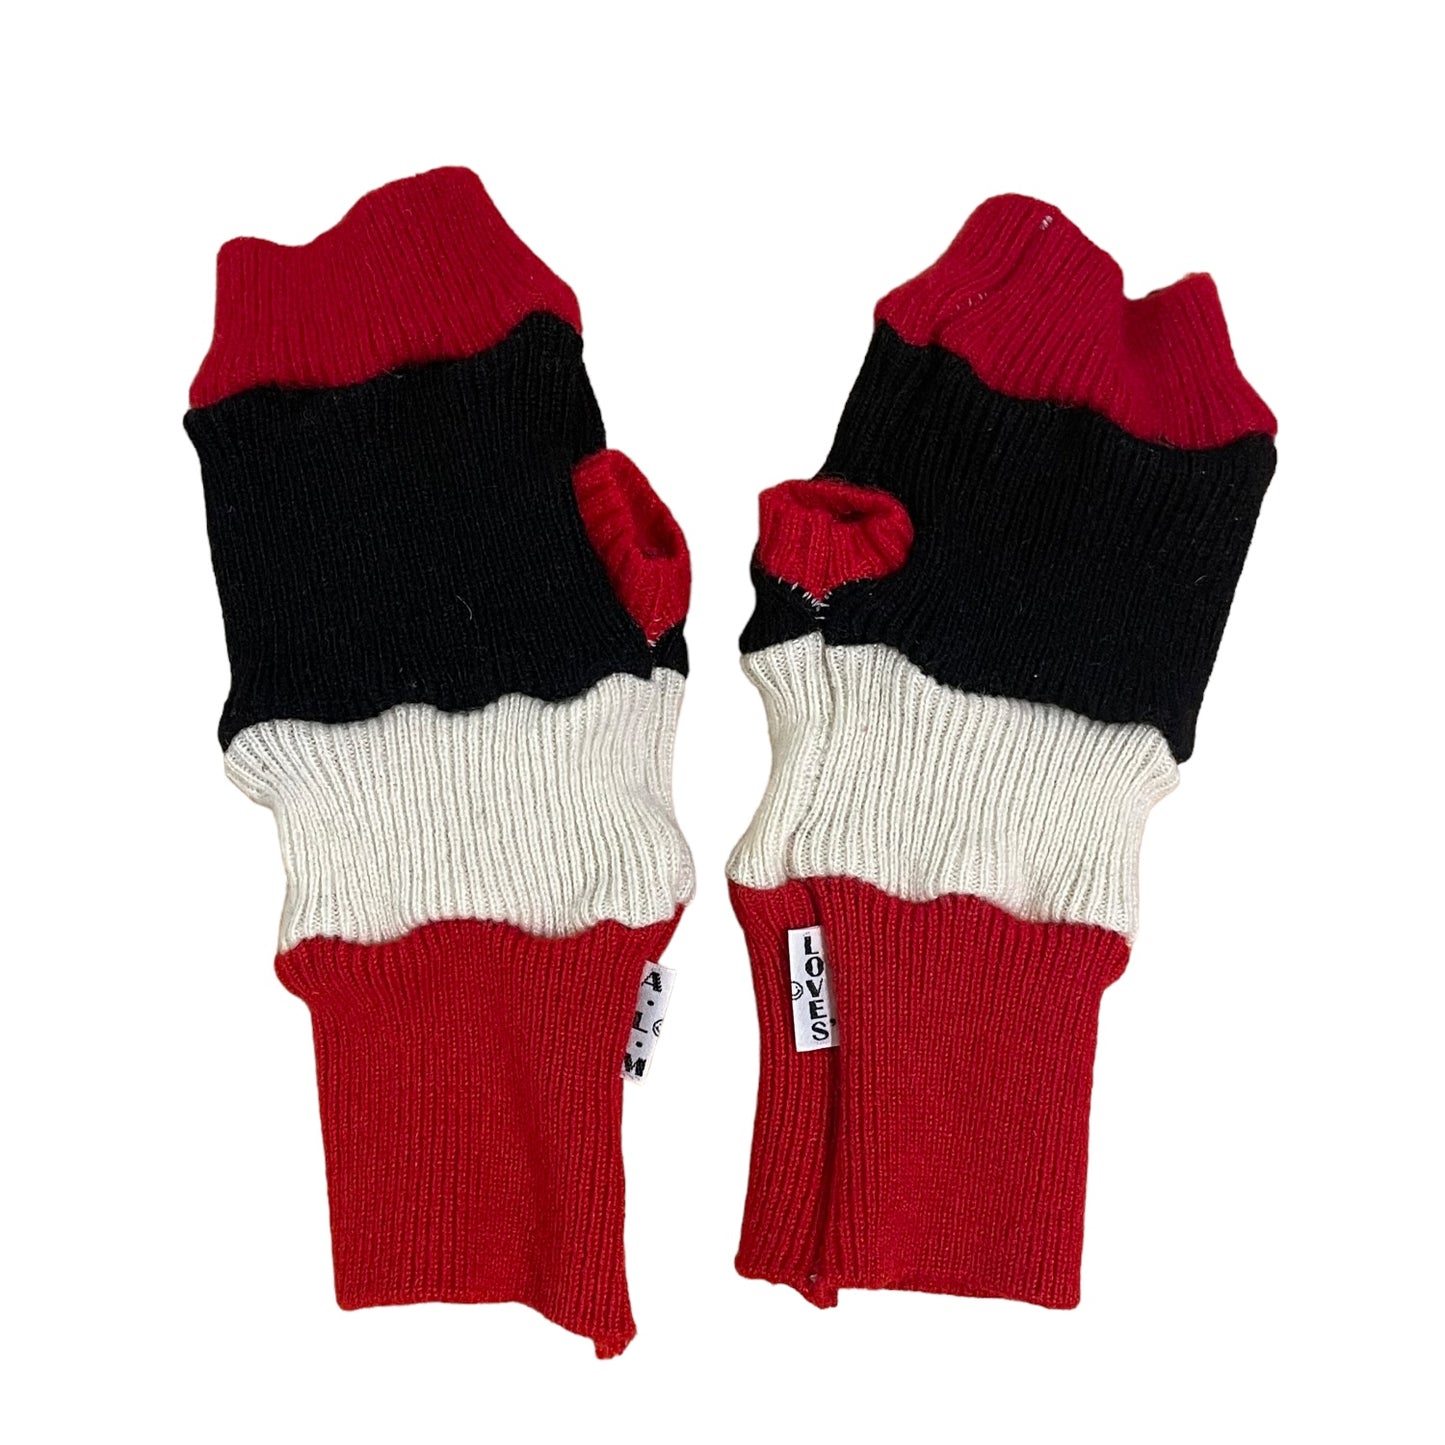 Recycled Cashmere Hand Warmer Gloves #13